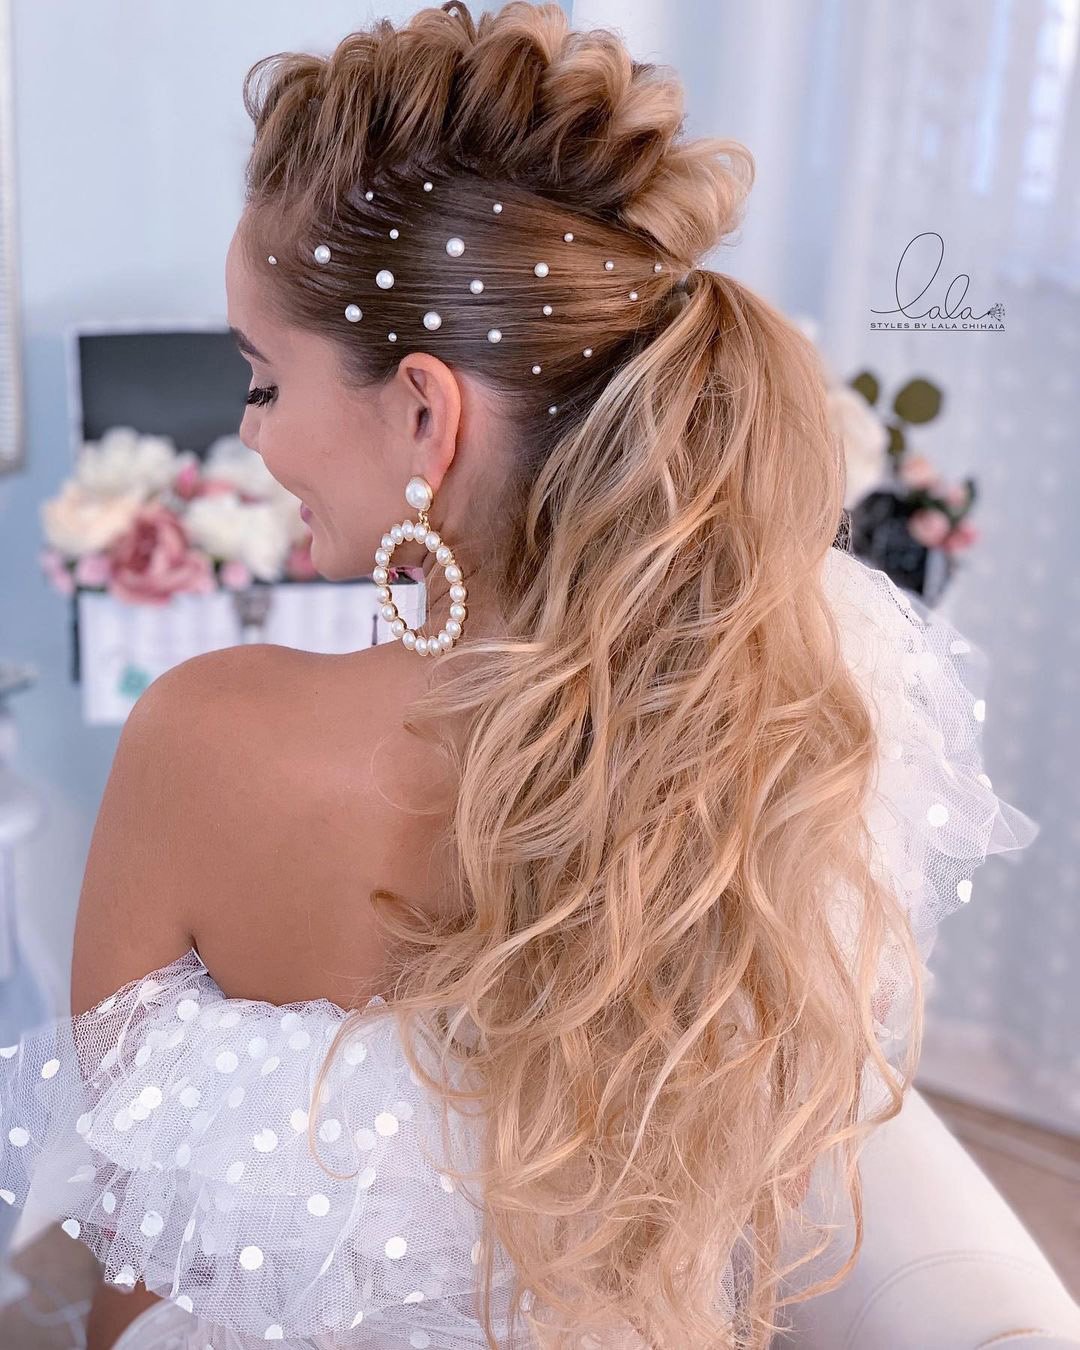 swept back wedding hairstyles braided updo with ponytail lalasupdos